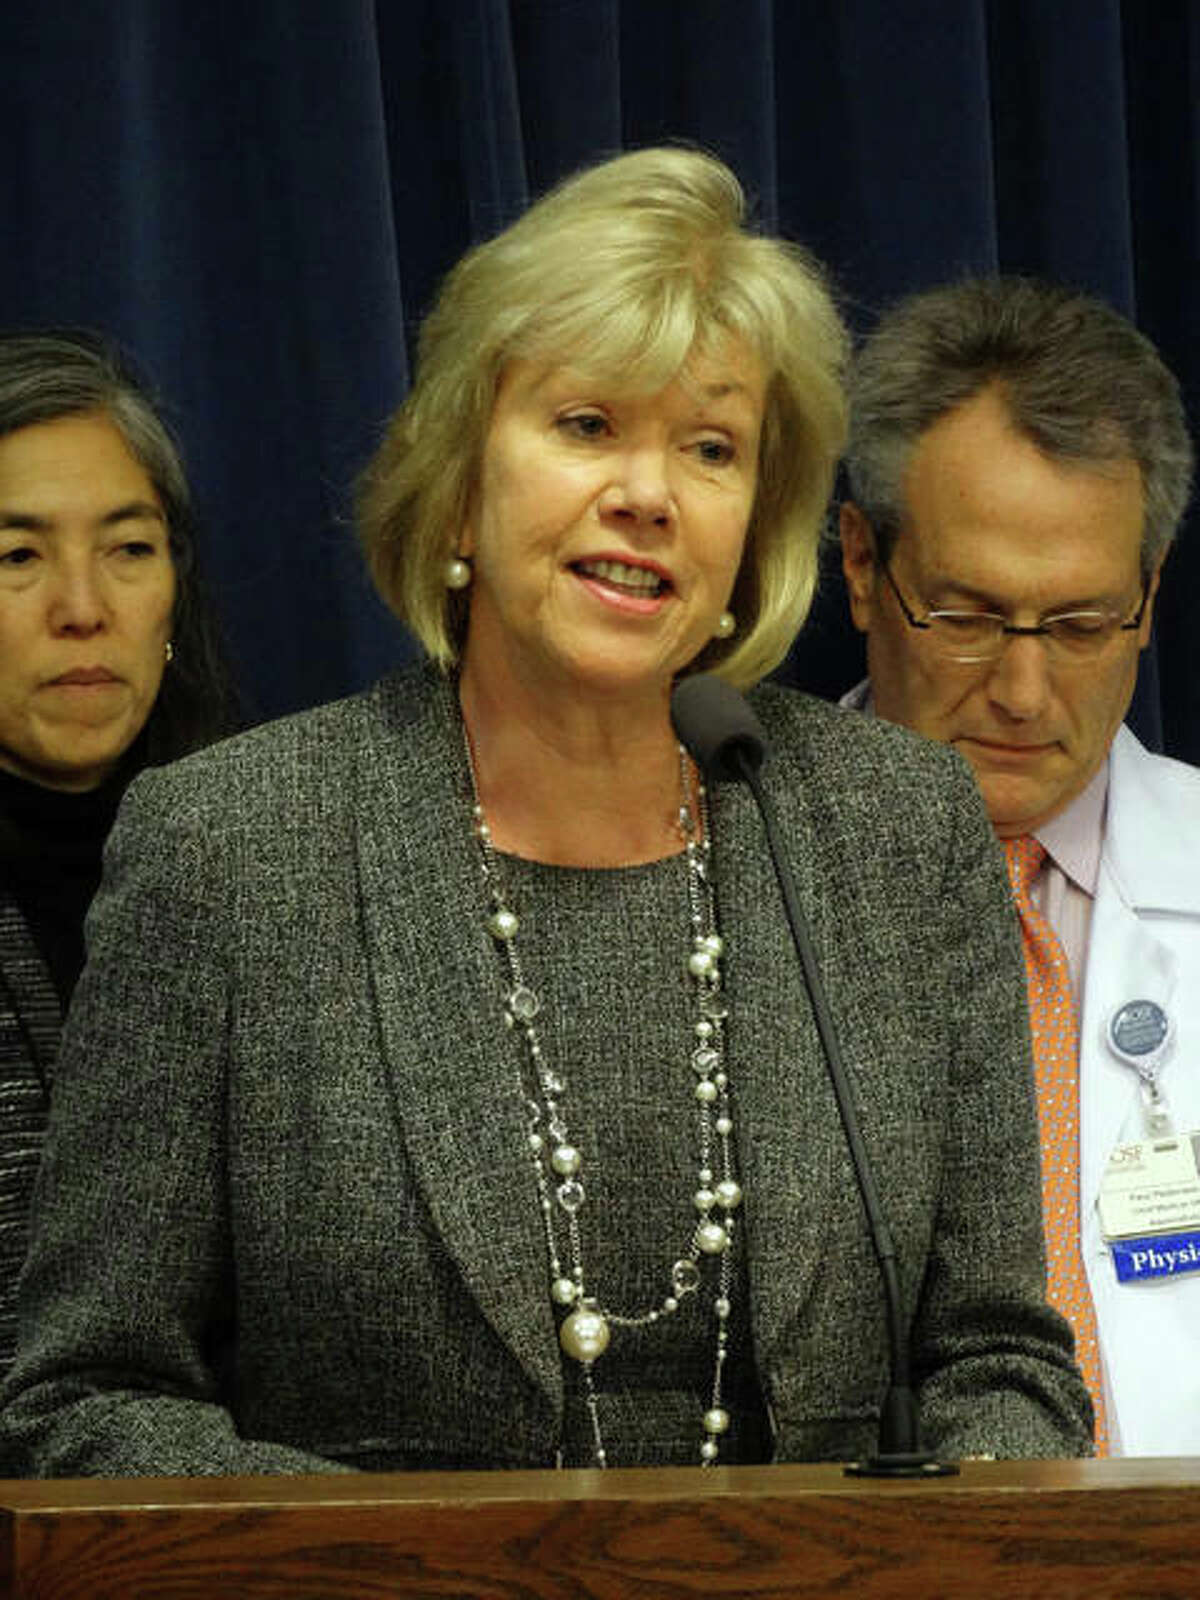 State Sen. Julie Morrison, a Democrat from Deerfield, said Tuesday during a press event in Springfield that raising the minimum age to purchase tobacco products in Illinois will reduce the state’s health care costs by millions of dollars. This issue is personal to her, she said, because her father began smoking at 14 and died at 57.